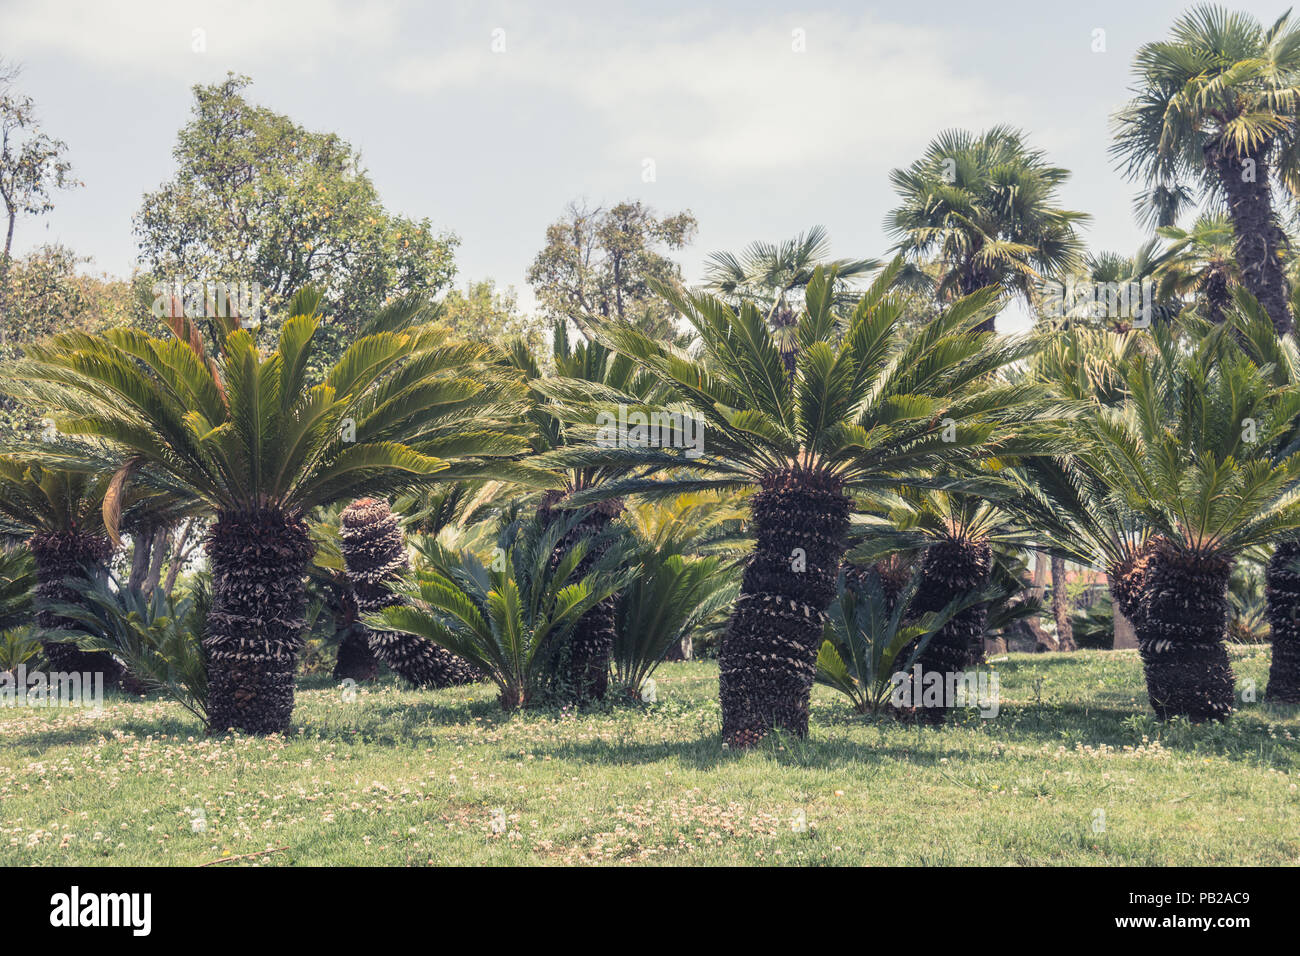 Palm trees and lawn Stock Photo